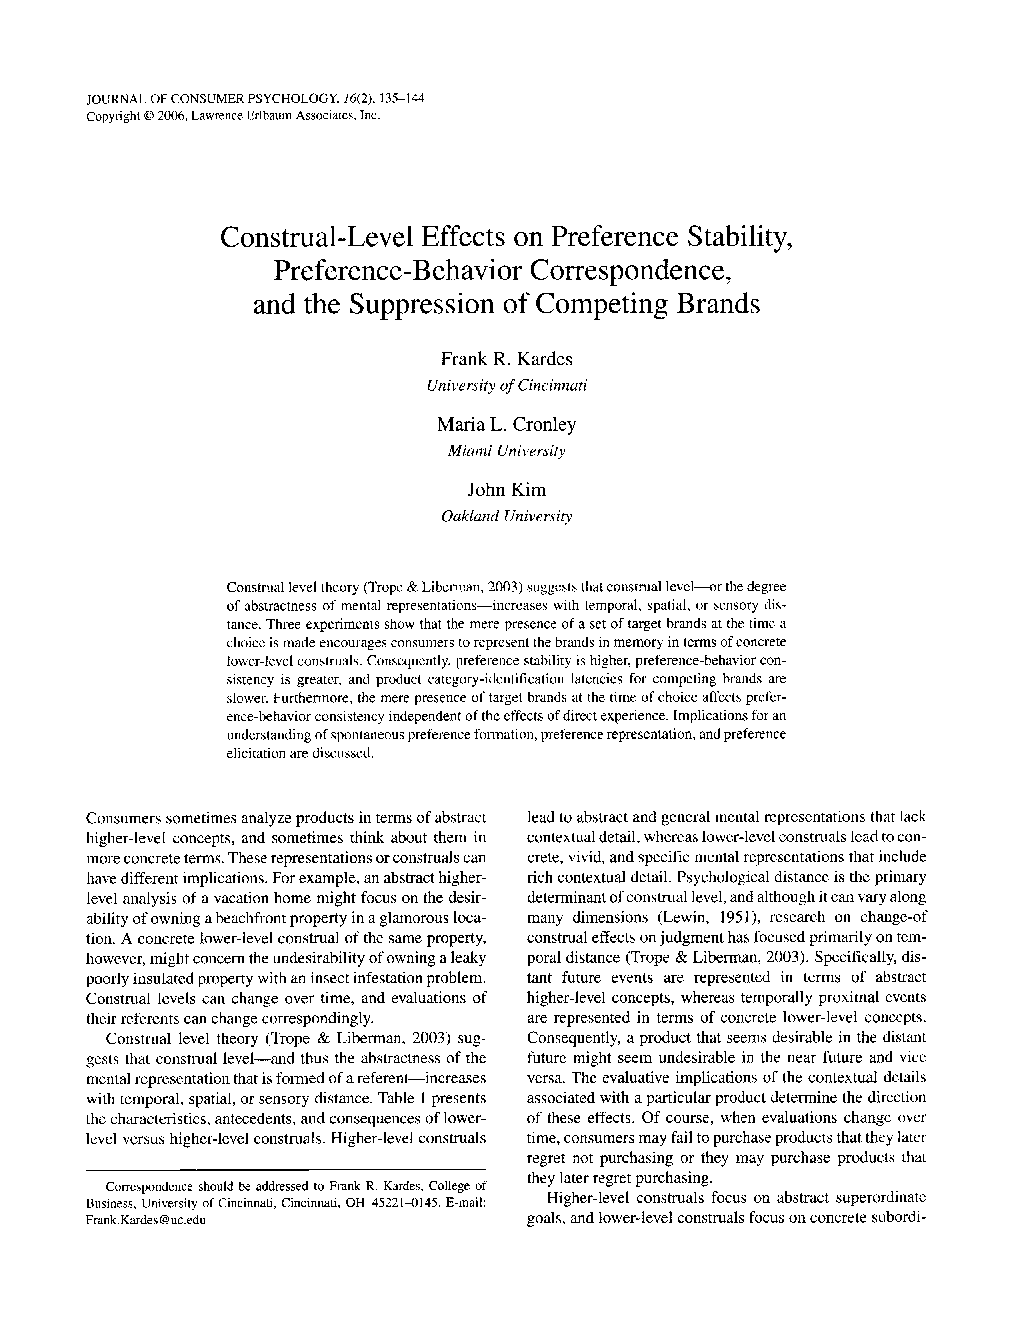 Construal-Level Effects on Preference Stability, Preference-Behavior Correspondence, and the Suppression of Competing Brands